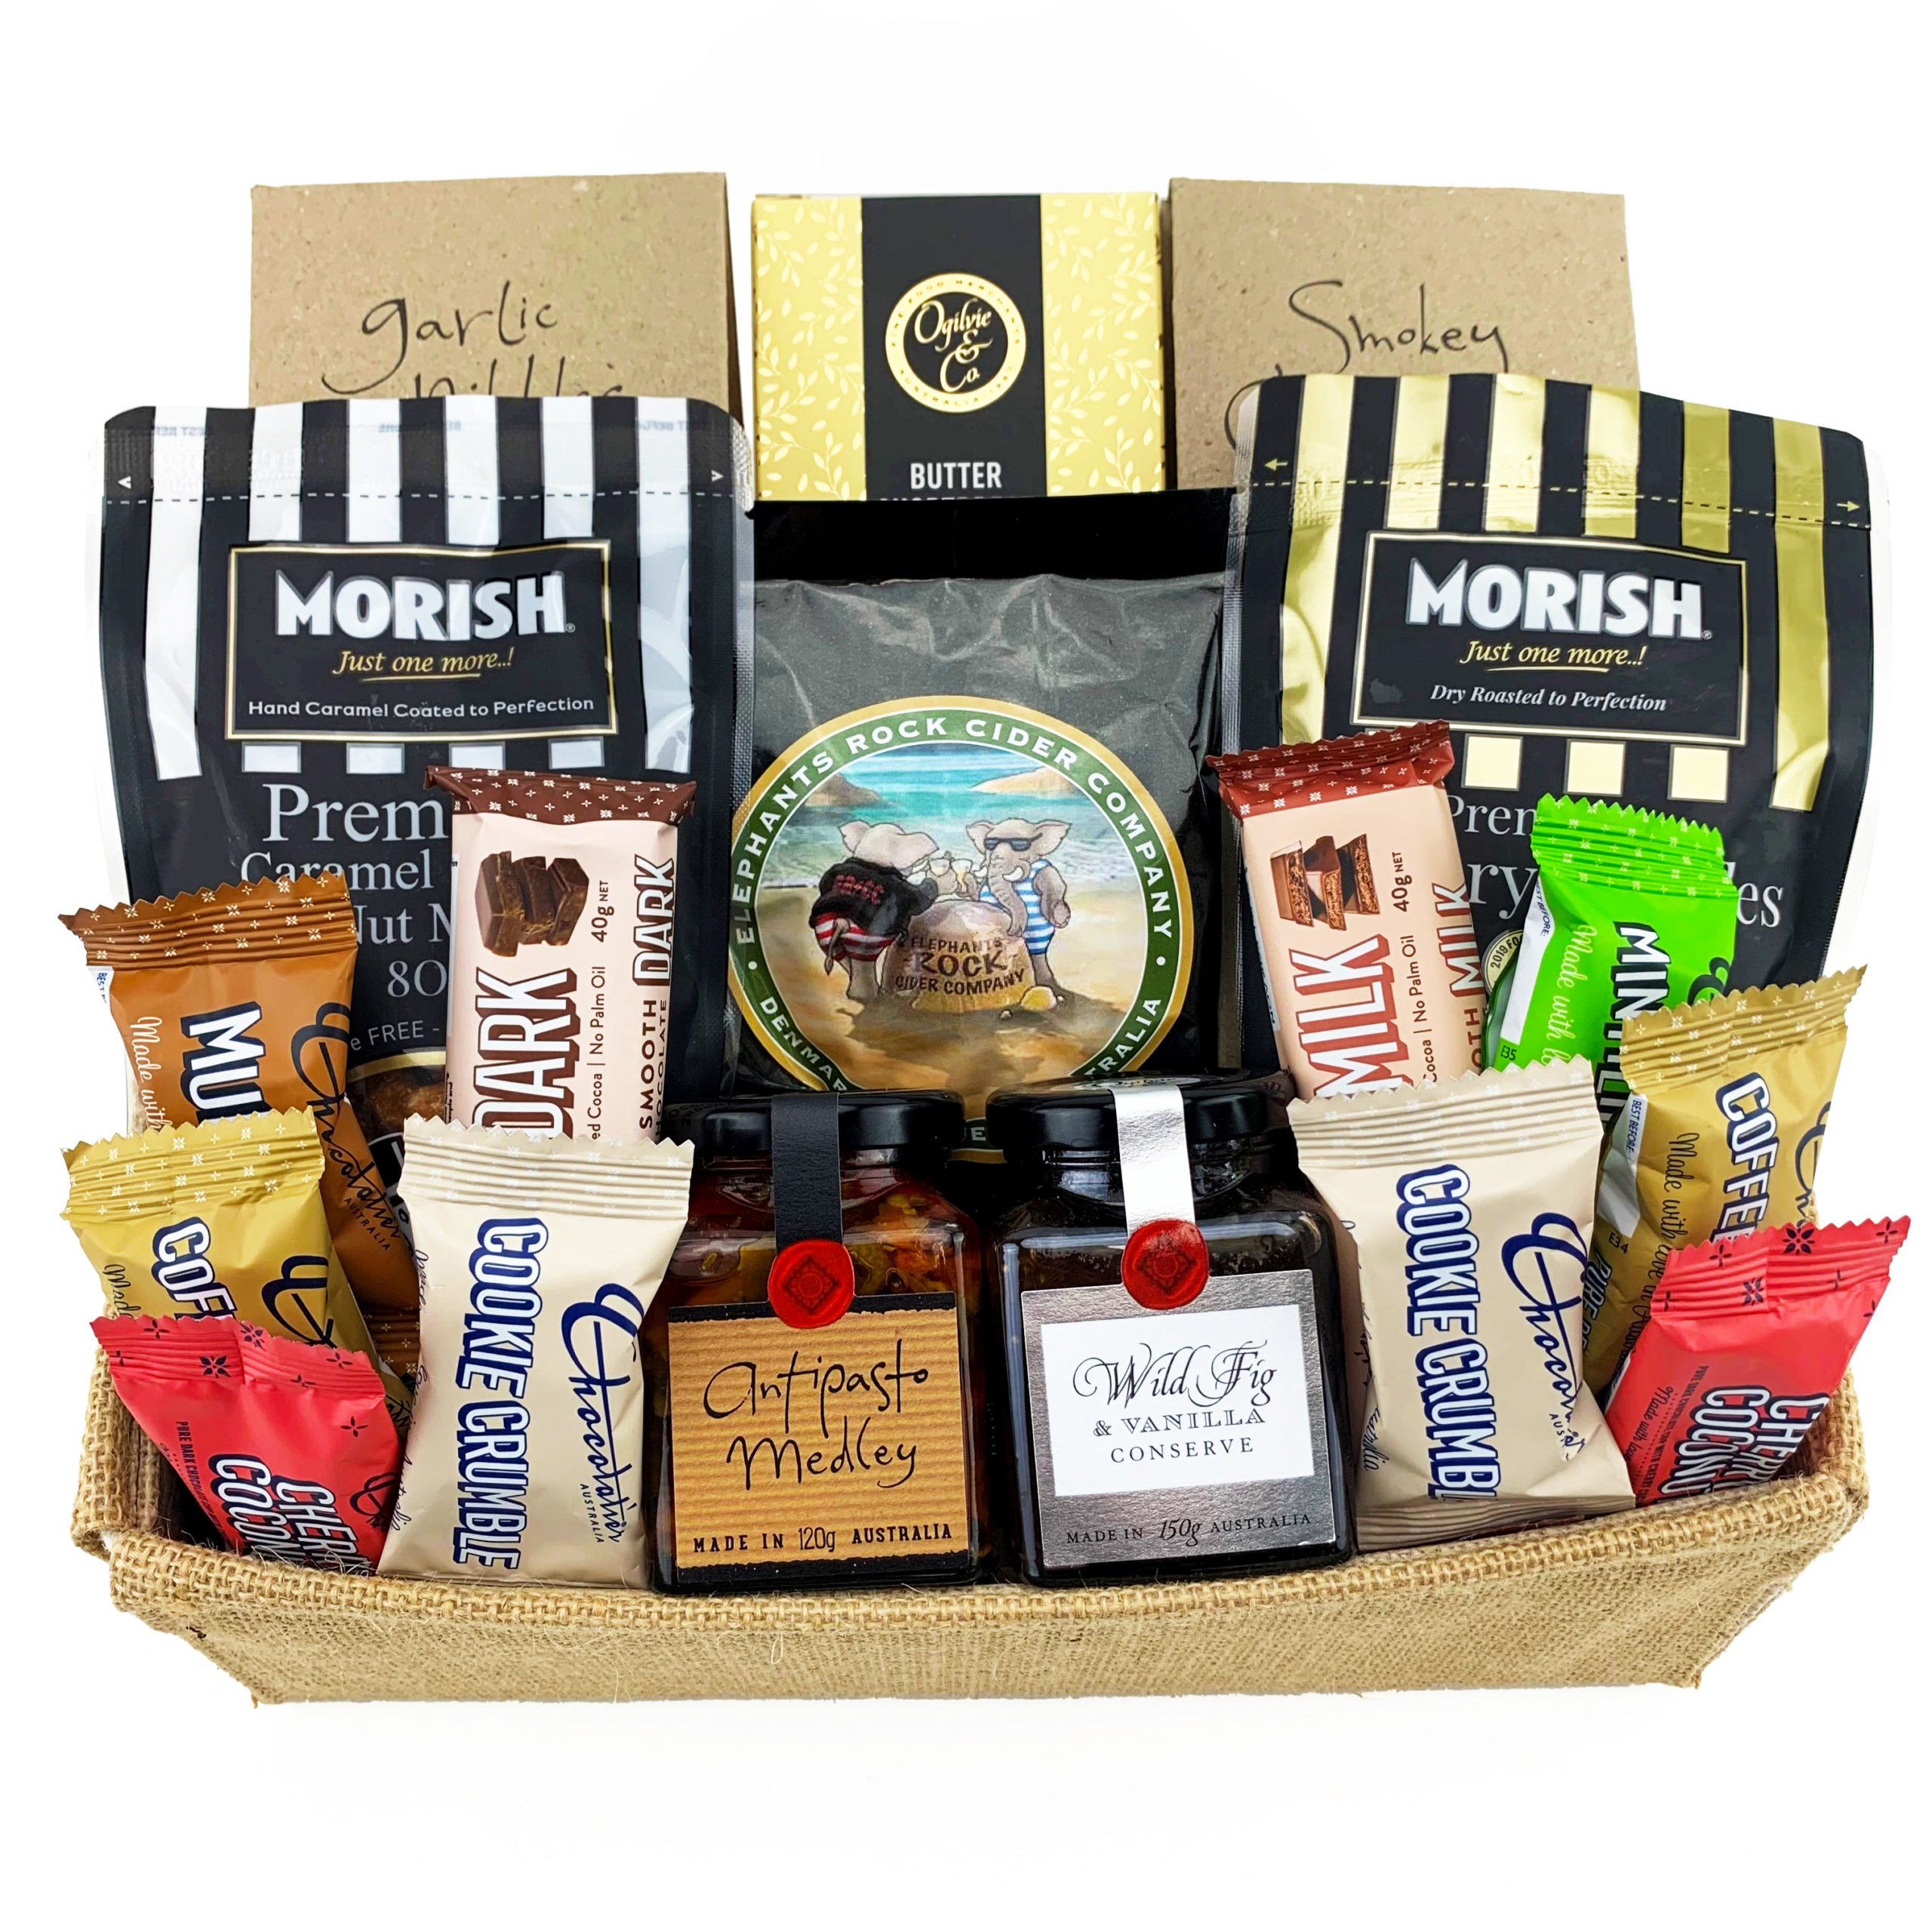 All our Most Recent Blogs Here at Australian Gourmet Gifts!